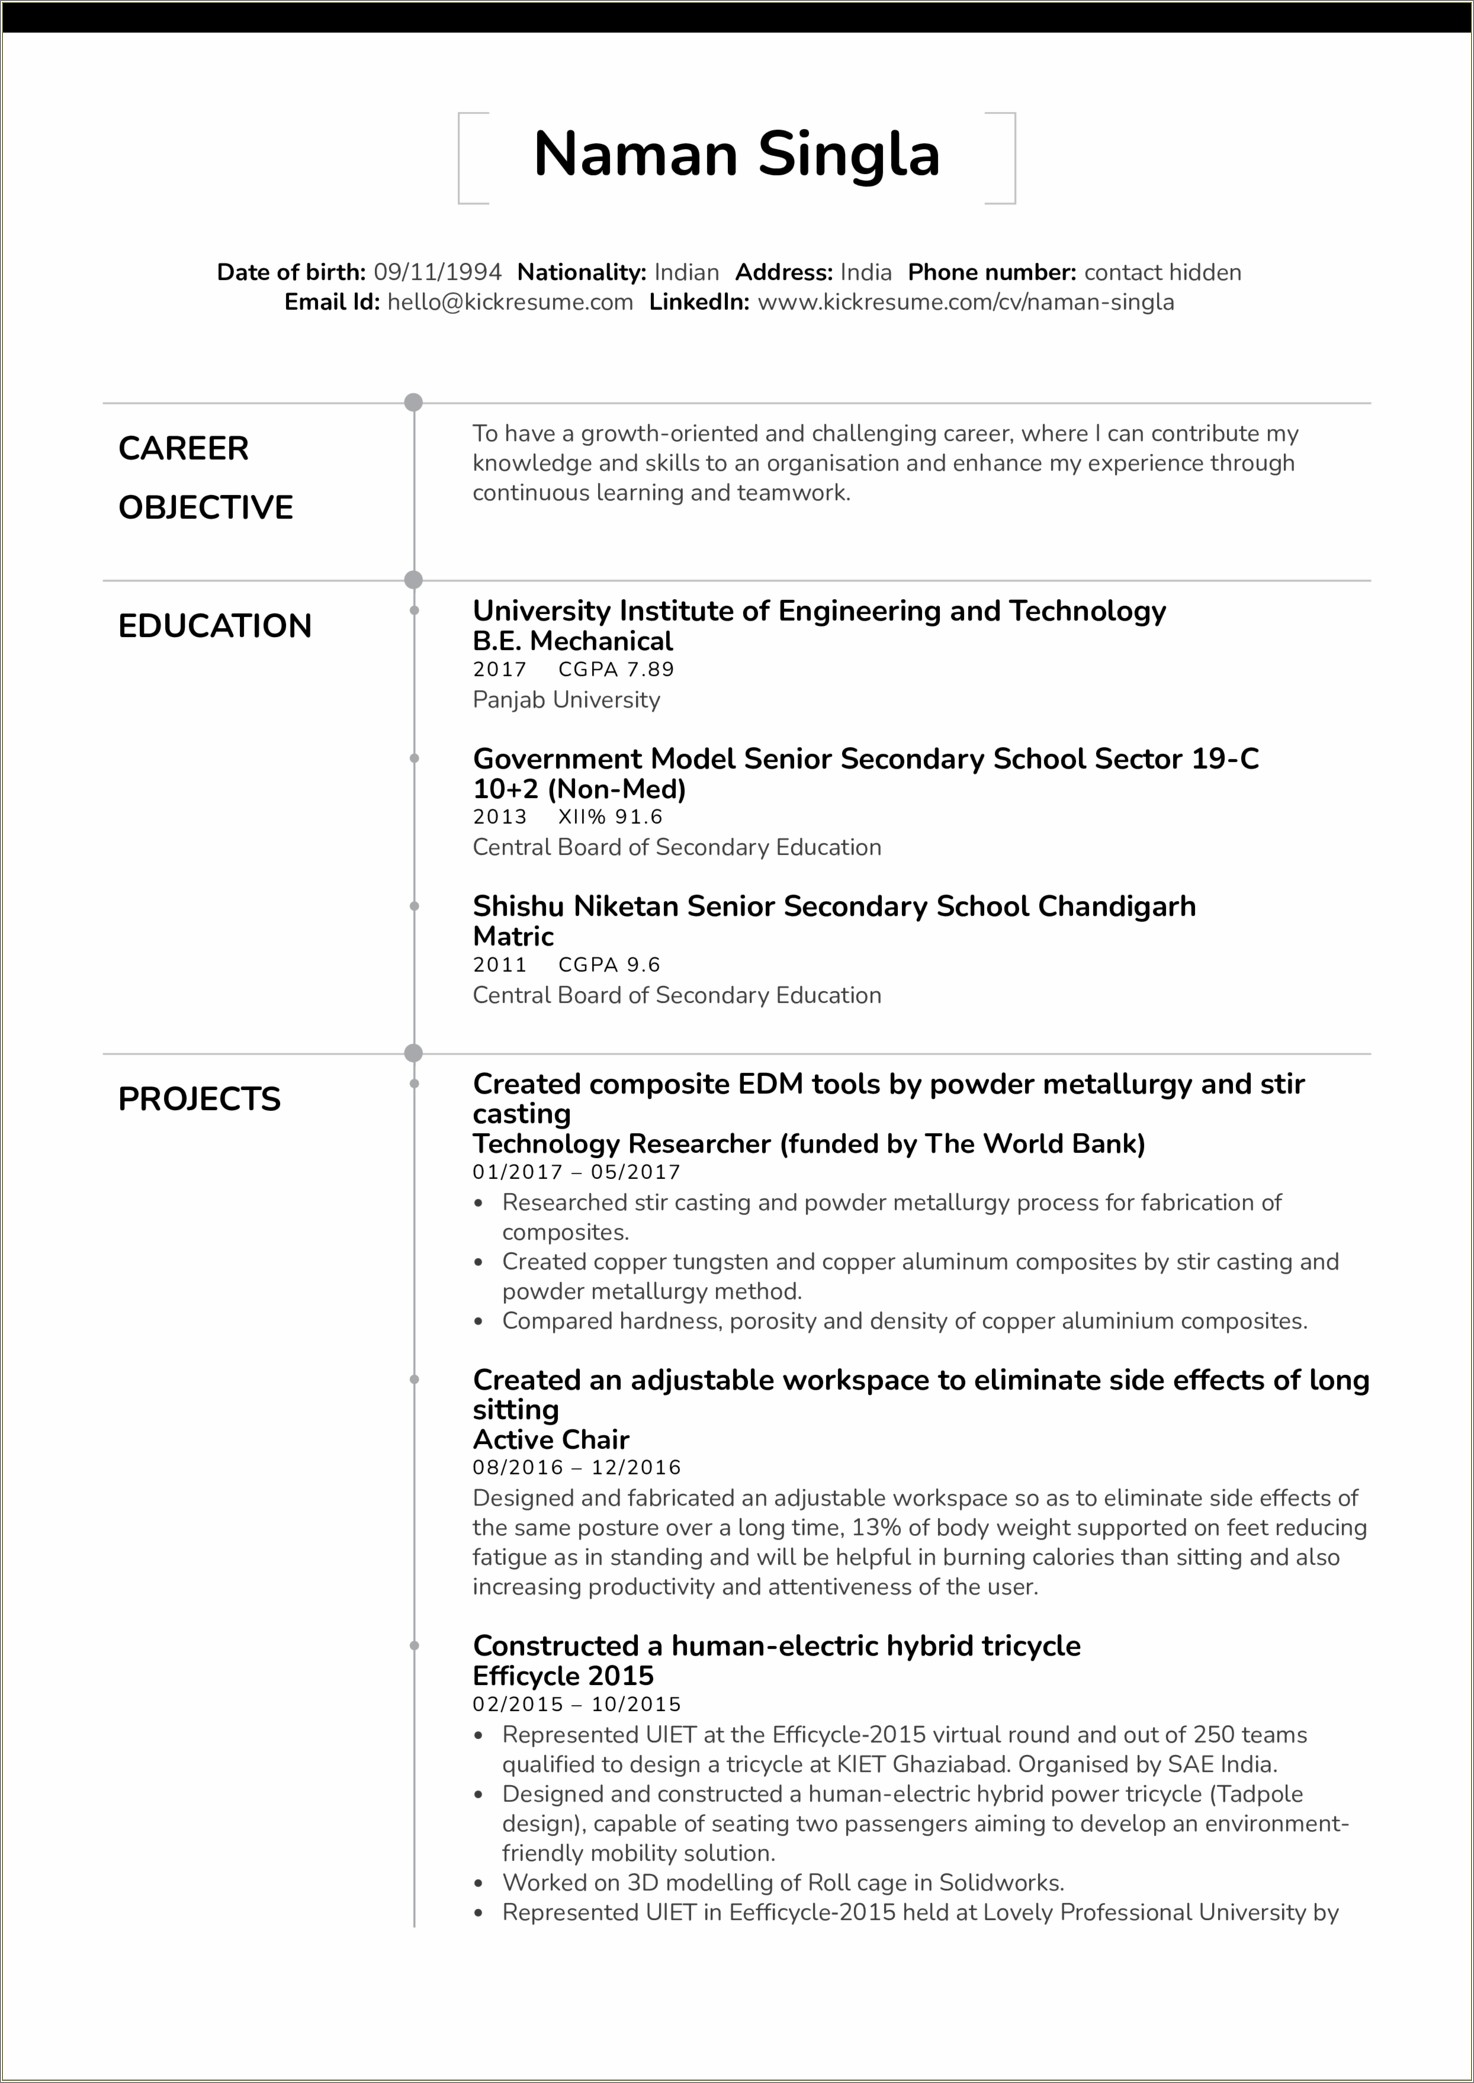 General Resume Objective Examples For Servers